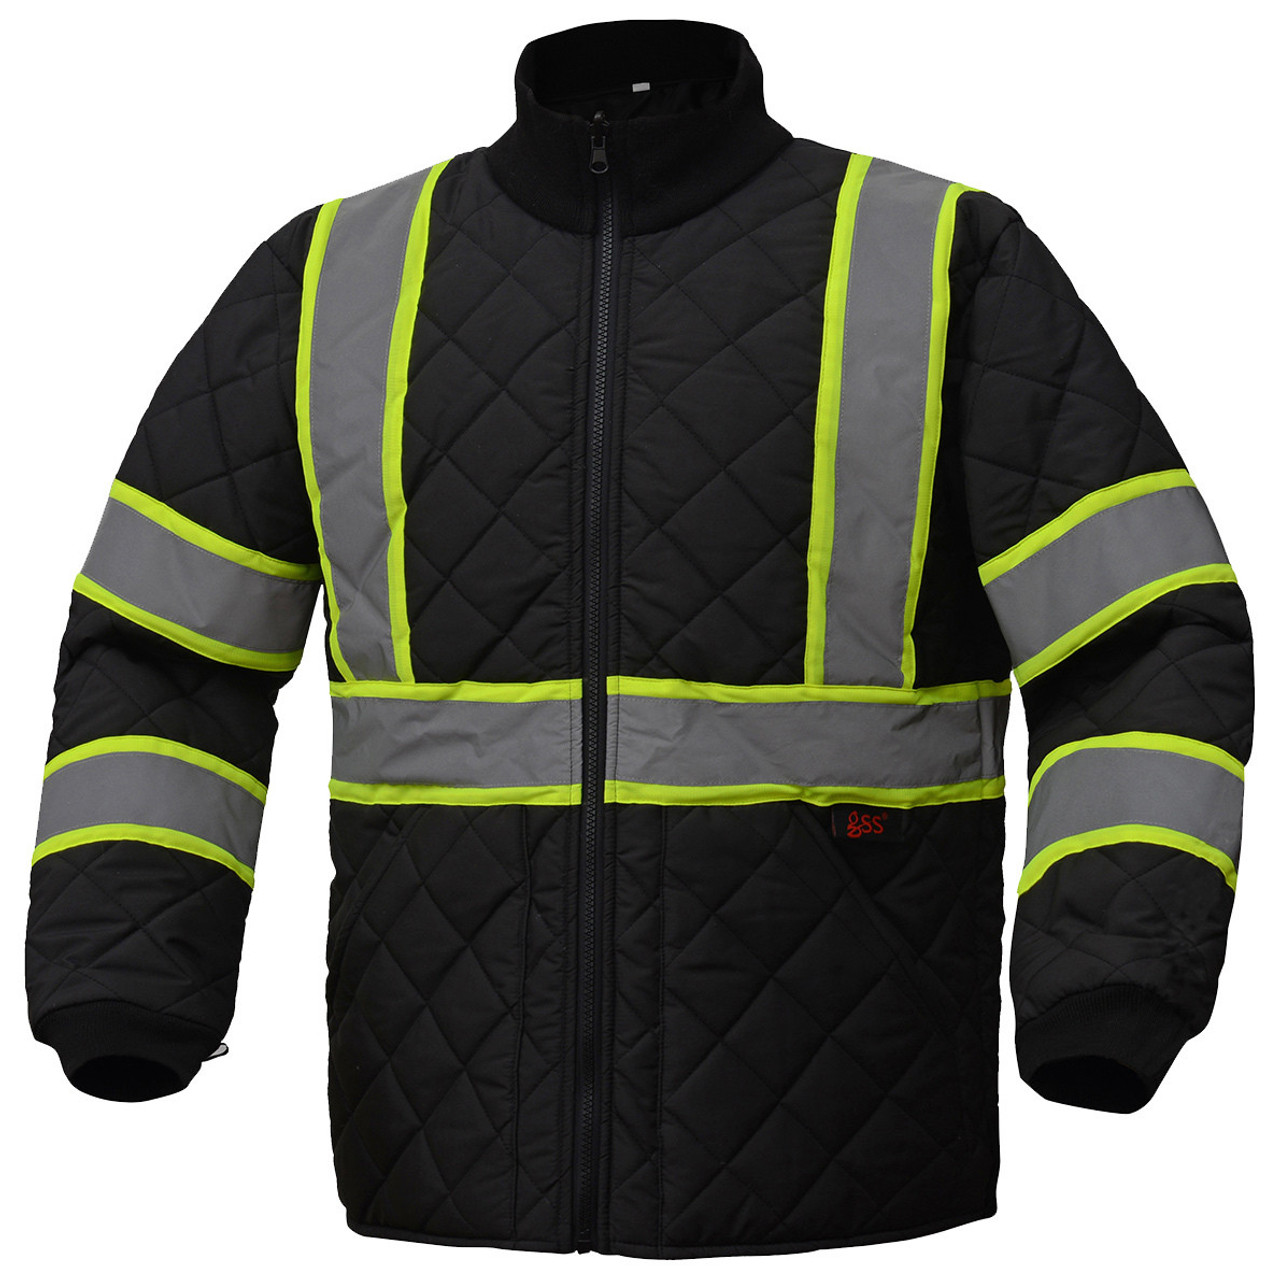 Black Quilted Jacket - Apparel G&S GSS : Two-Tone Safety | Non-ANSI Safety Hi-Vis 8009 Products